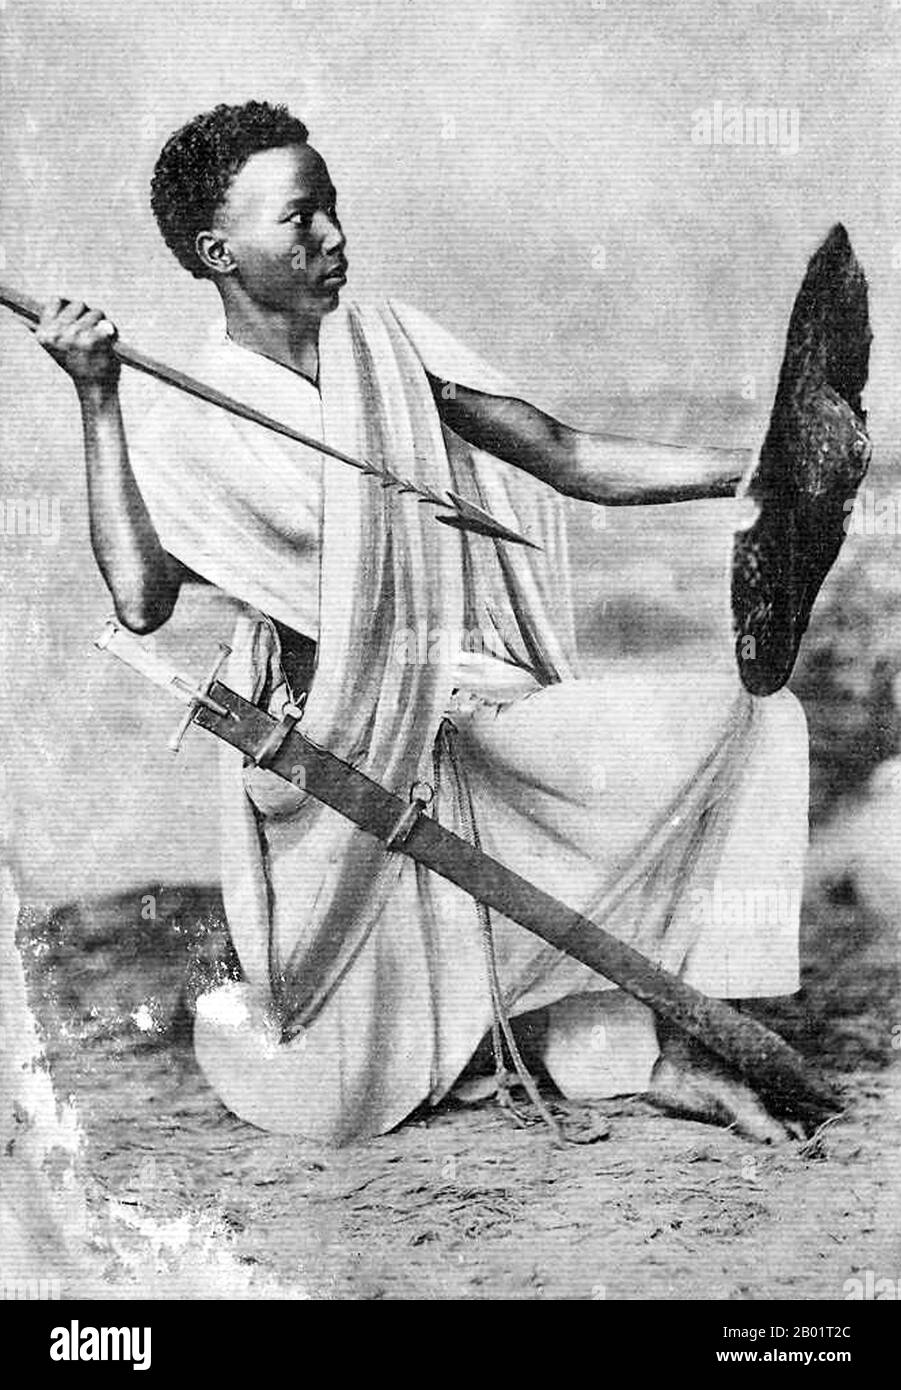 Mali: A 'young Sudanese warrior' (from the former French Soudan), early 20th century.  French Sudan was a colony in French West Africa that had two separate periods of existence, first from 1890 to 1899, then from 1920 to 1960, when the territory became the independent nation of Mali. Stock Photo